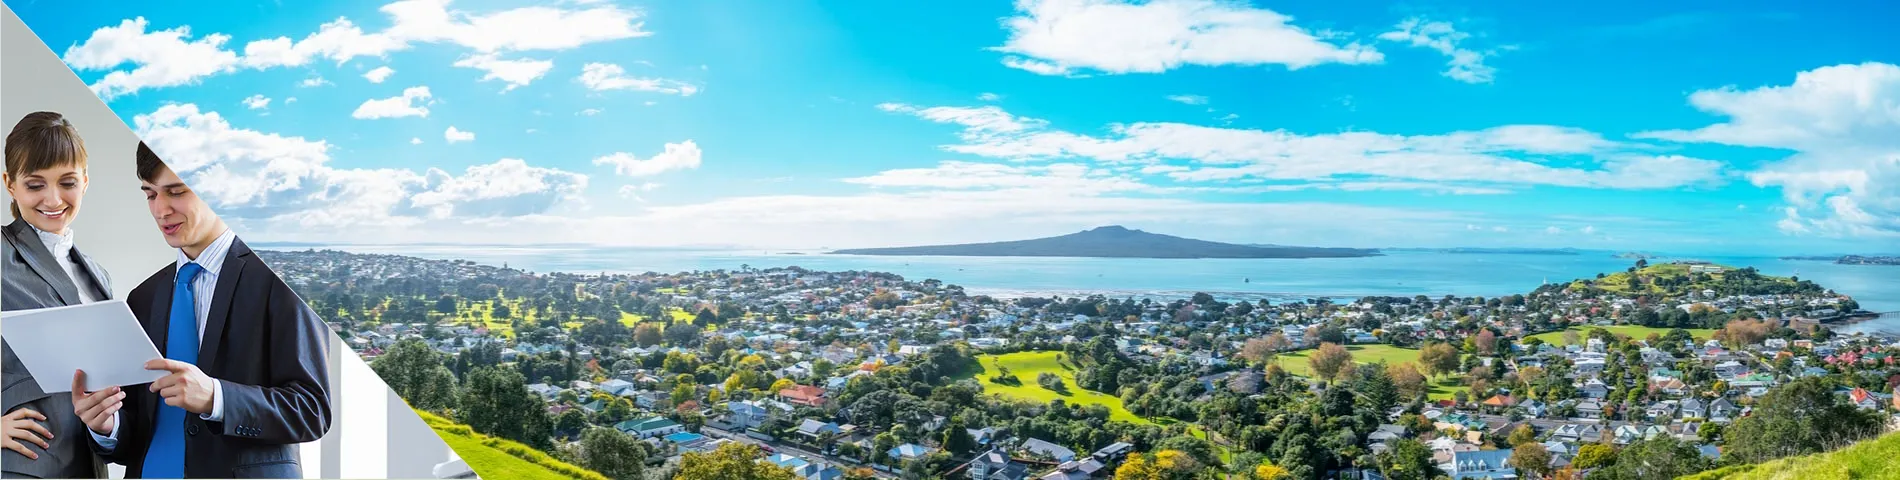 Auckland - Business One-to-One